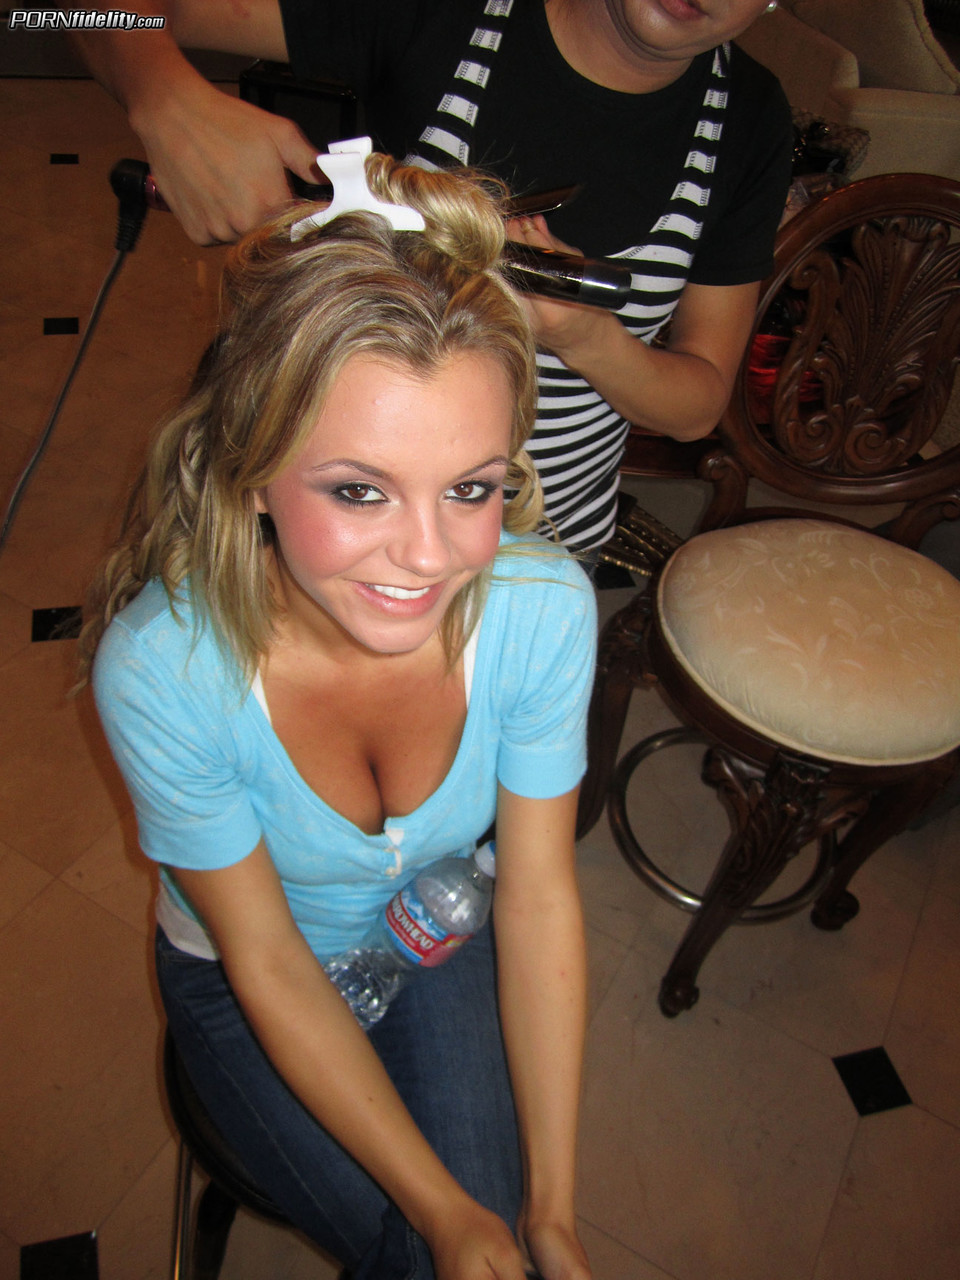 Attractive women Bree Olson & Kelly Madison strip together and pose for camera foto porno #425364725